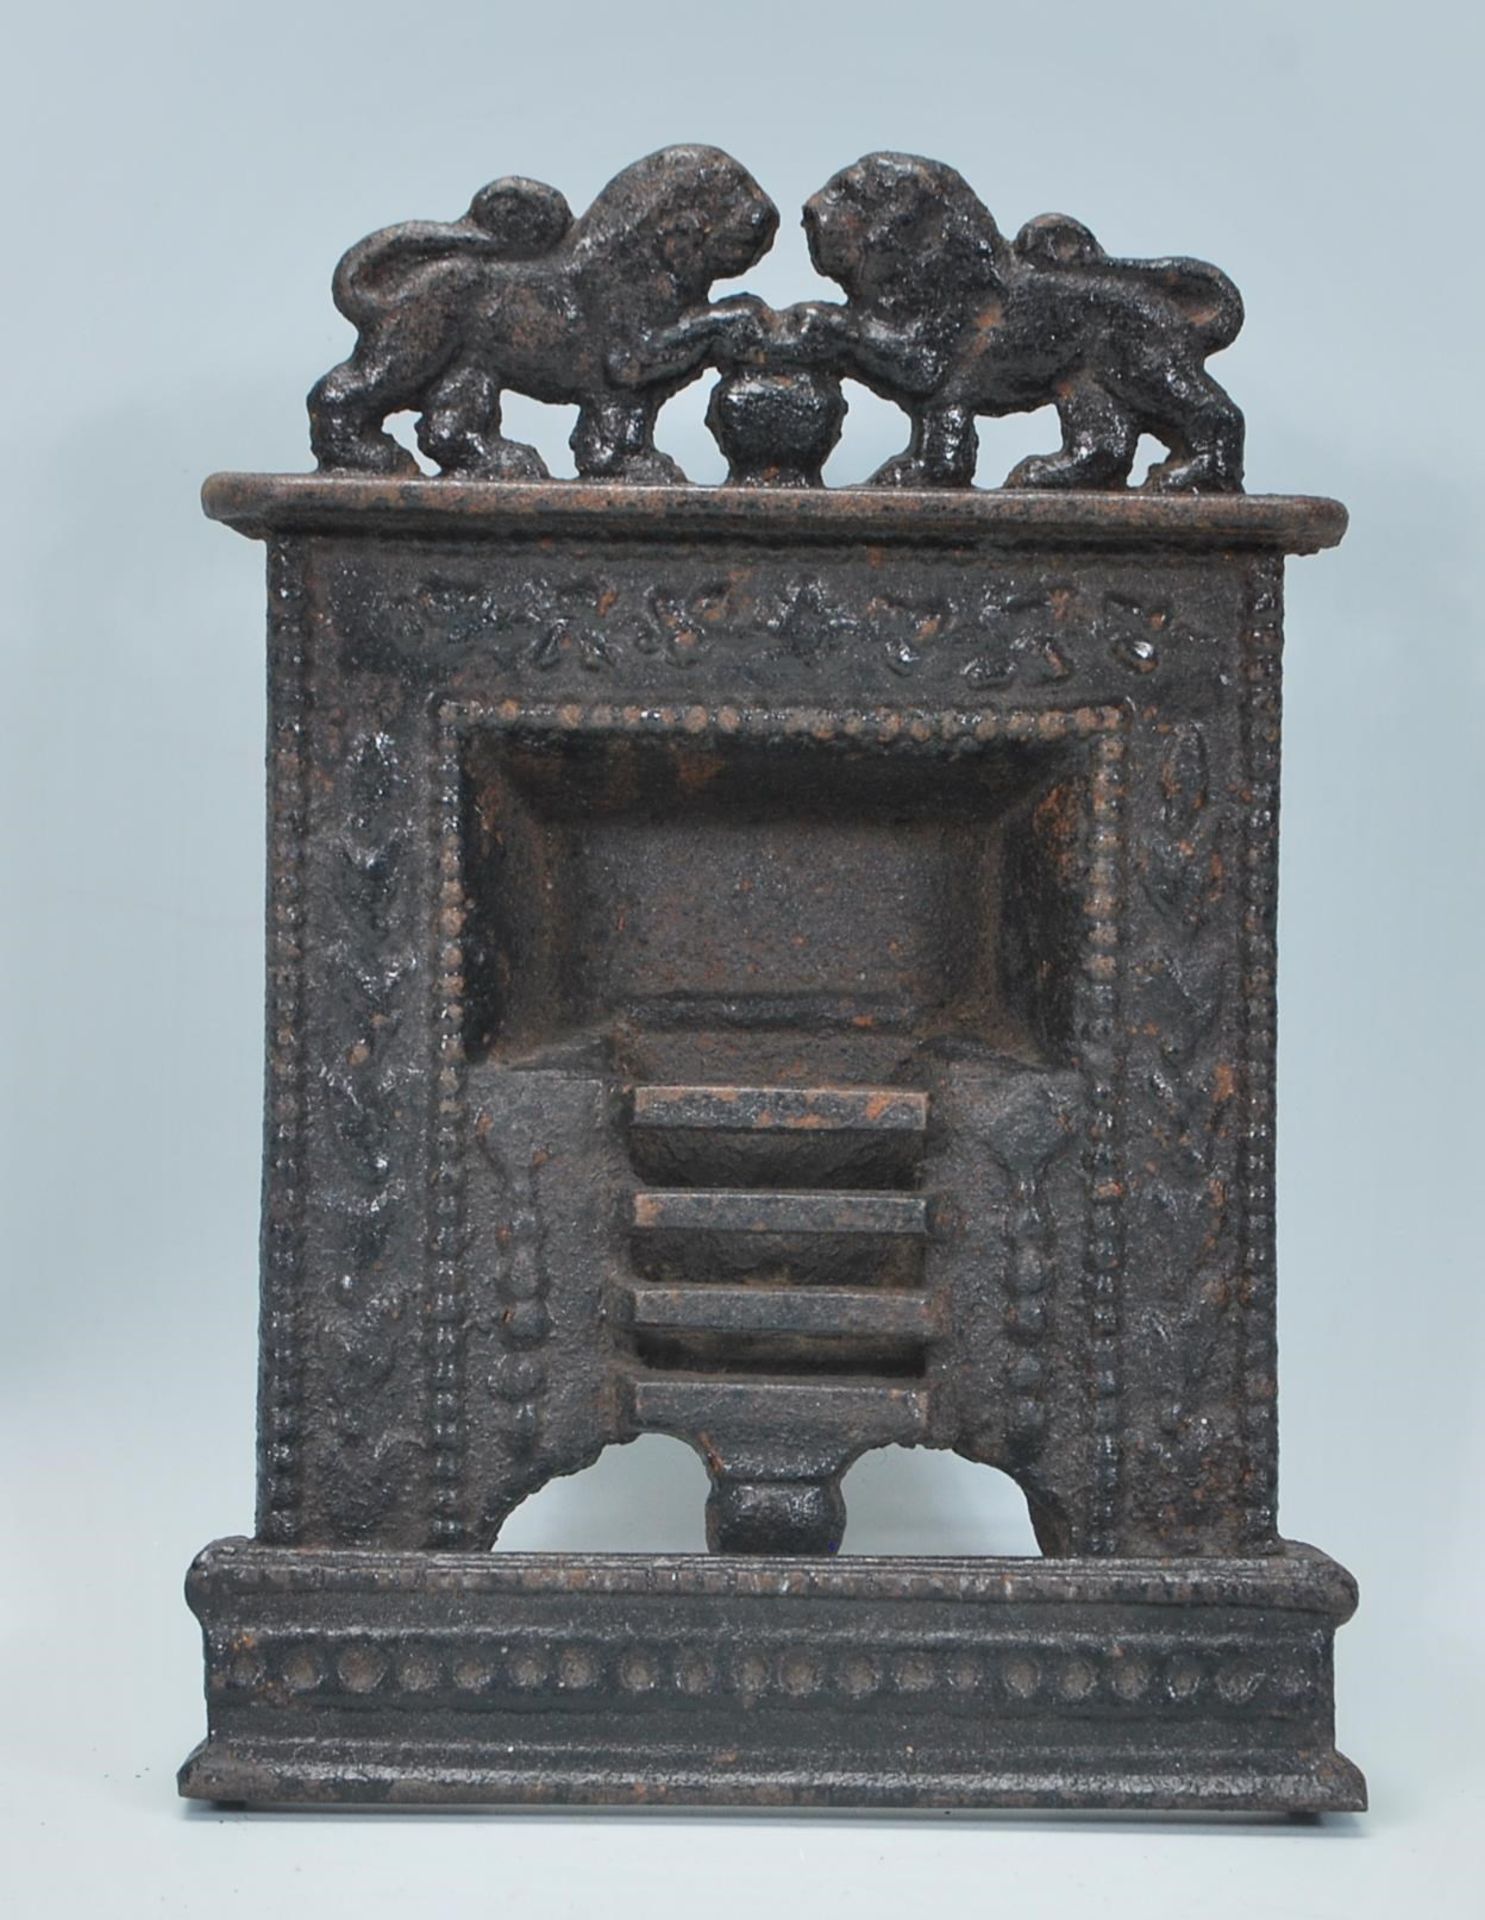 A 19th Century Victorian cast iron miniature tradesman's sample / novelty door stop in the form of a